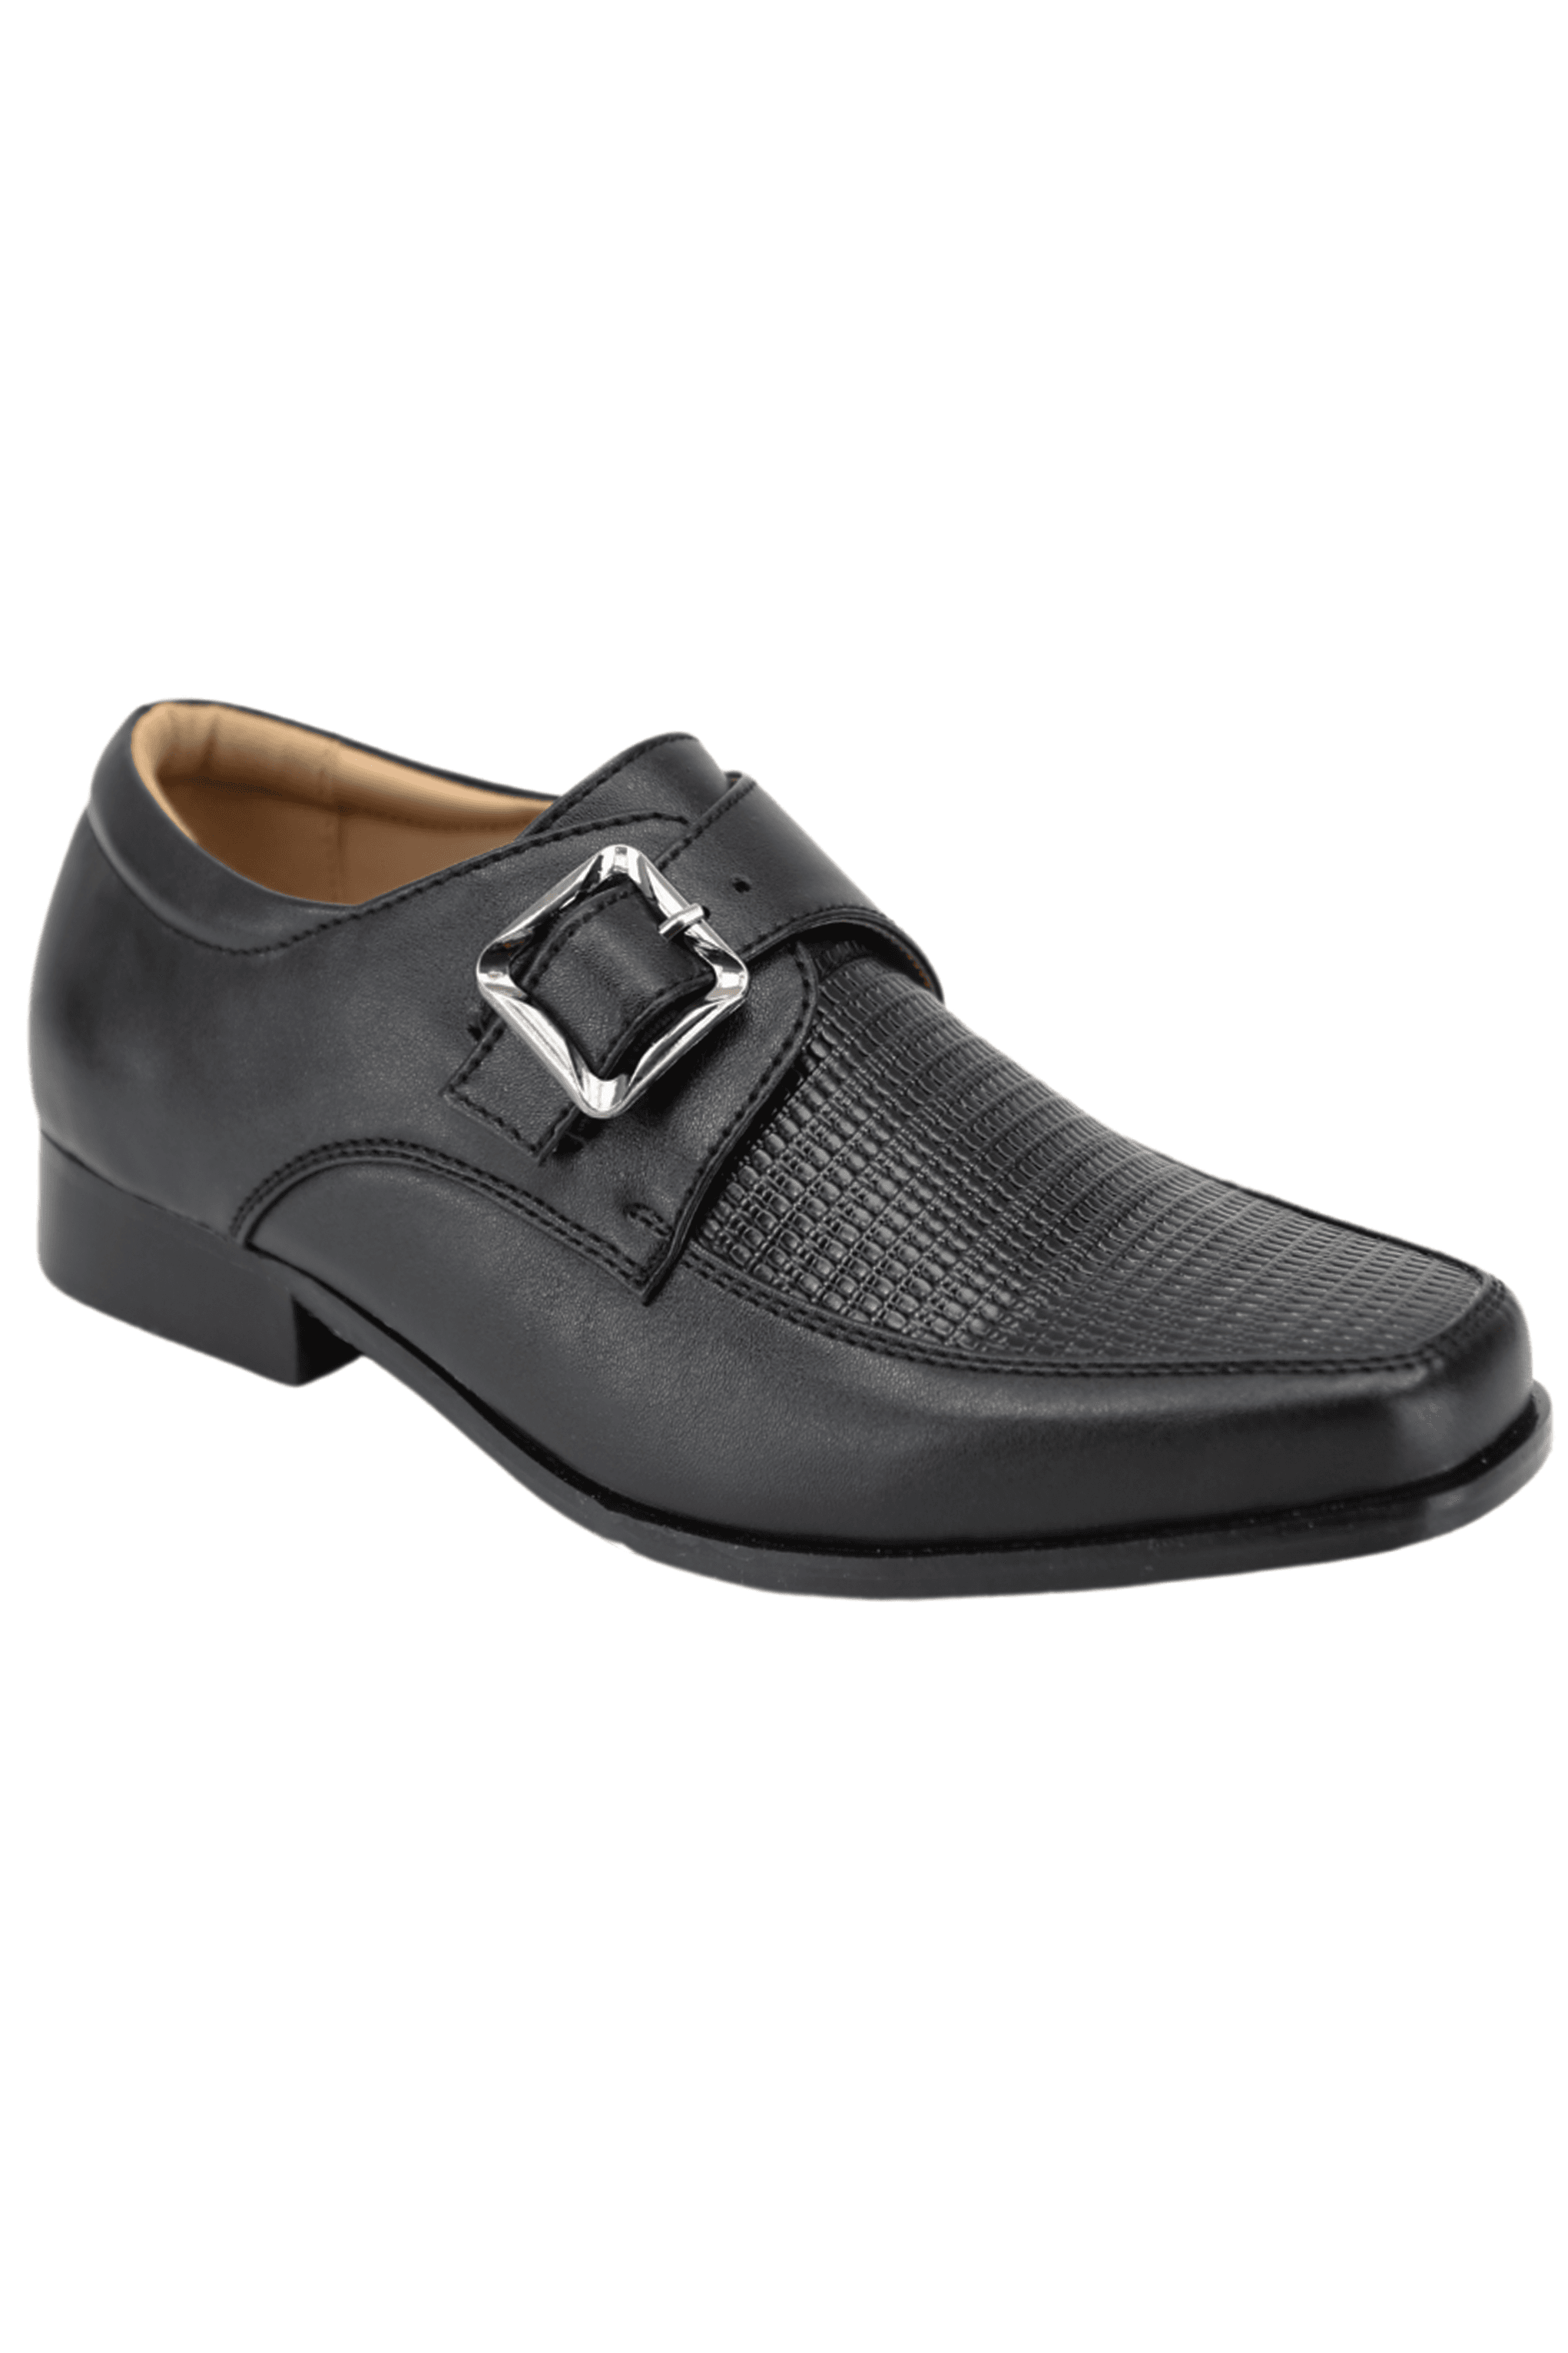 Boys Textured Leather Buckled Monk Shoes